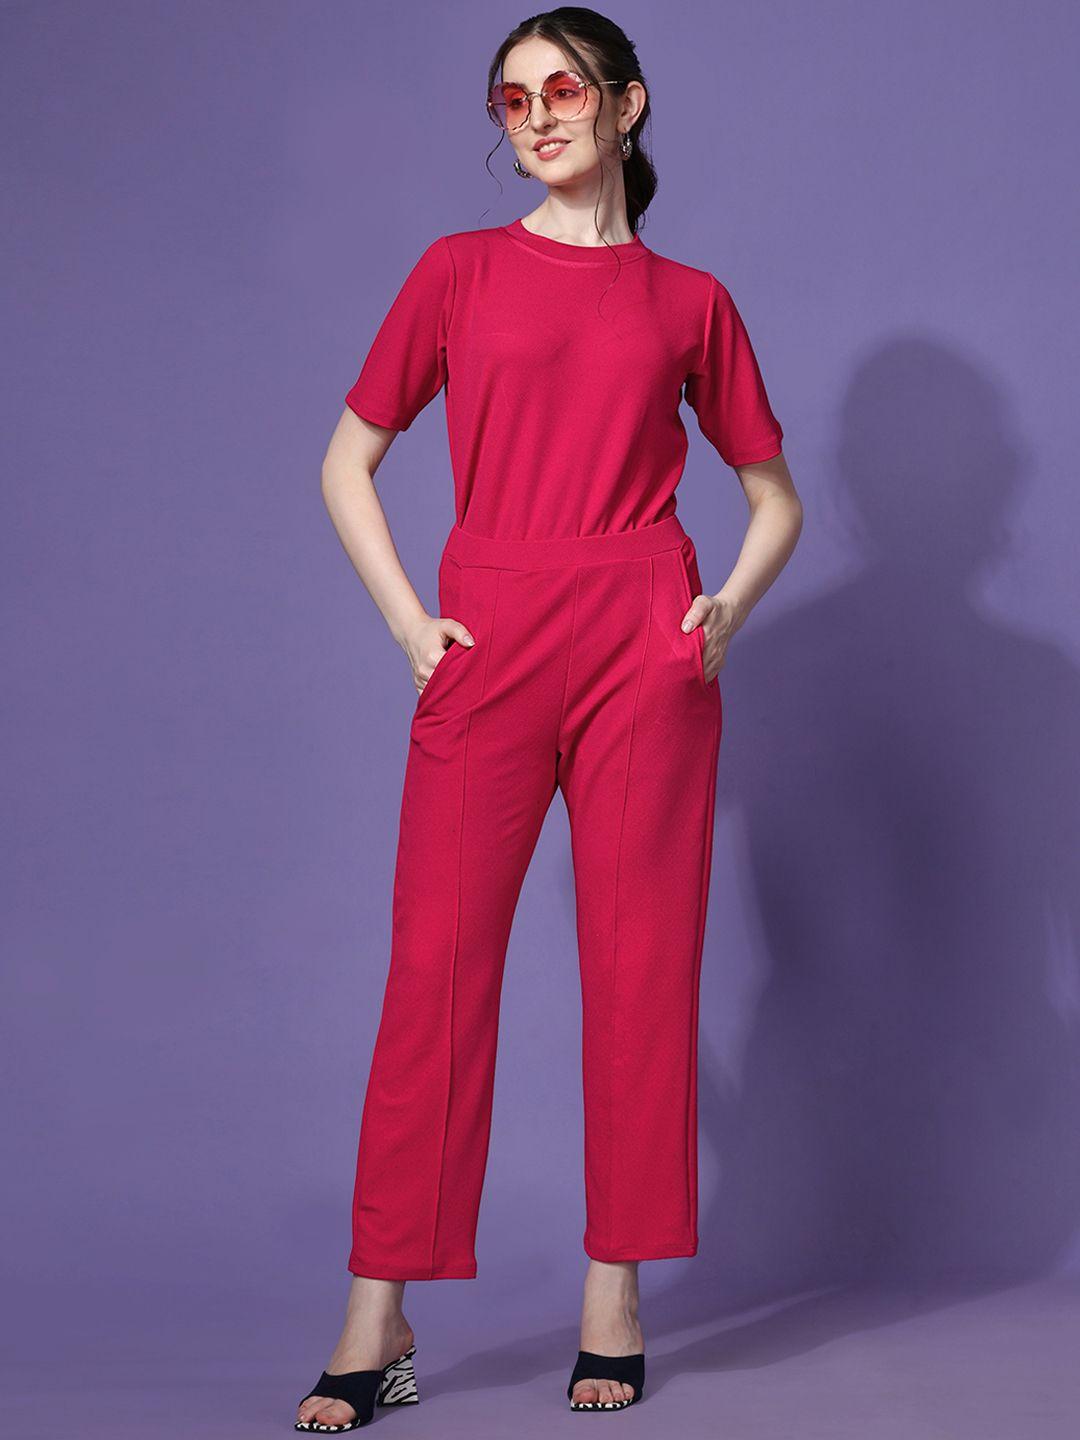 sheetal associates t-shirt with trousers co-ords